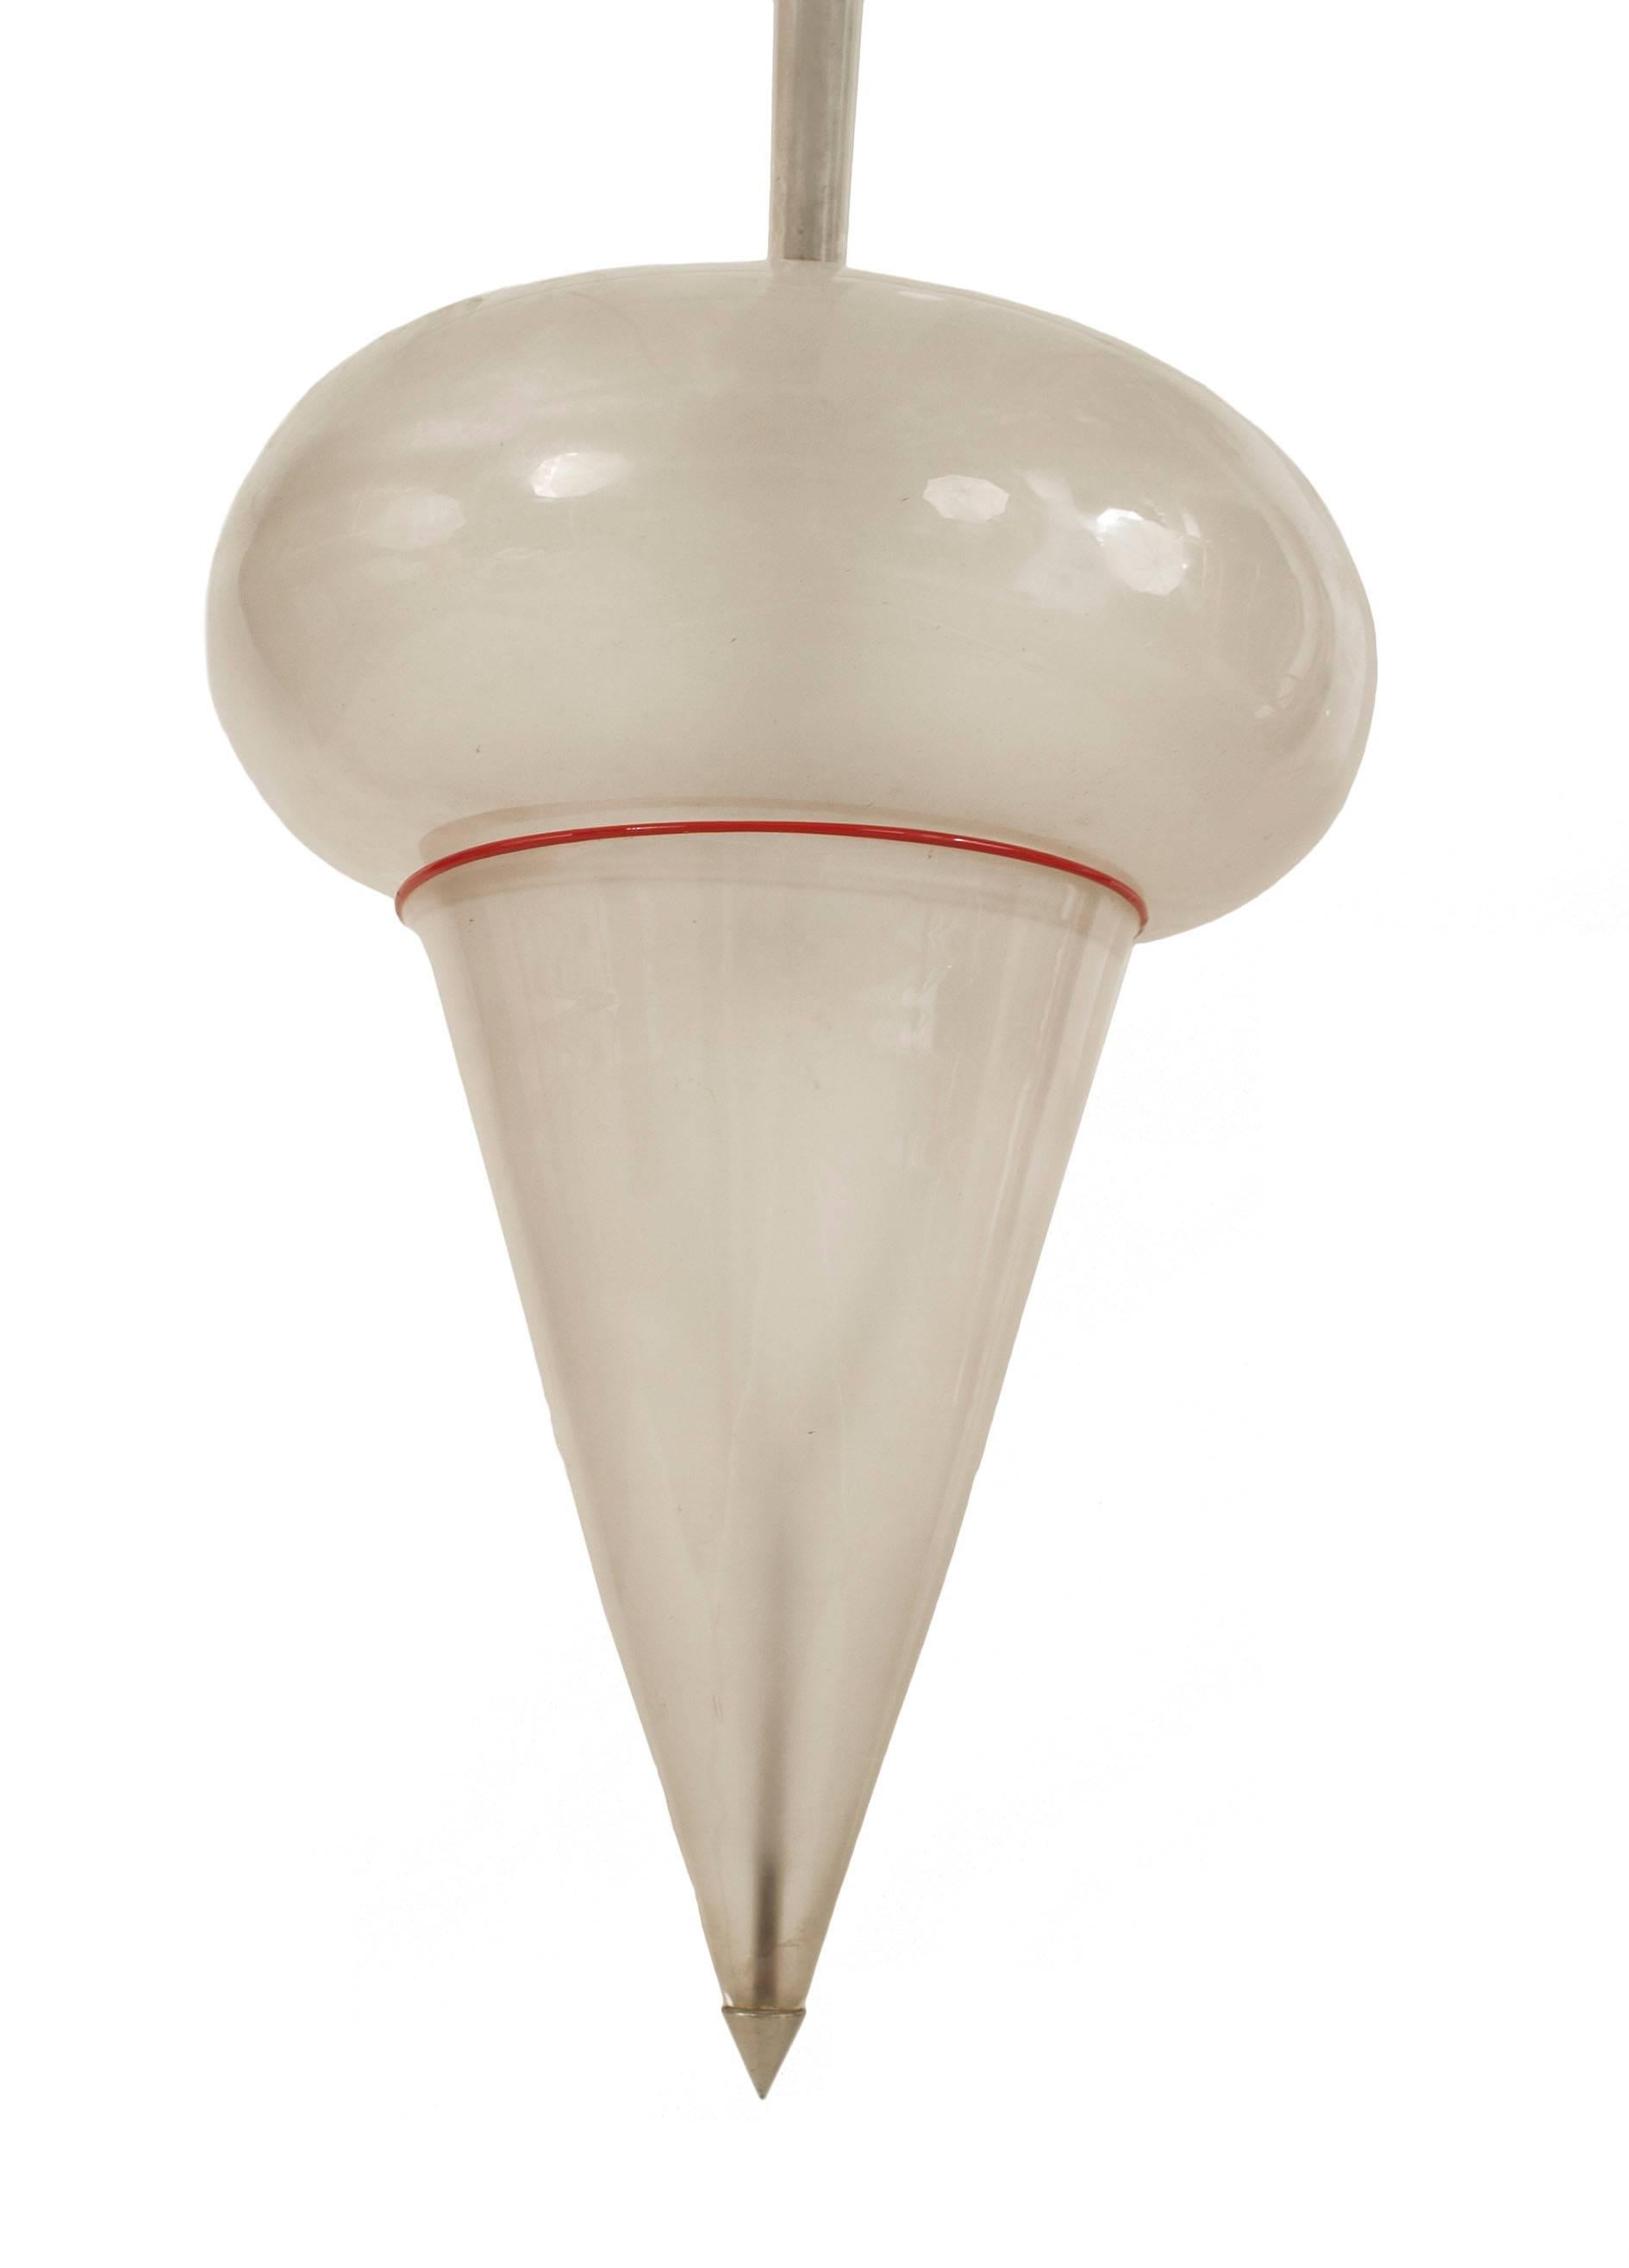 Italian 1950s hand blown frosted glass lantern with 2 narrow tiers with a red border trim over a short cylindrical form above a conical bottom section with a small chrome finial bottom (VENINI).
